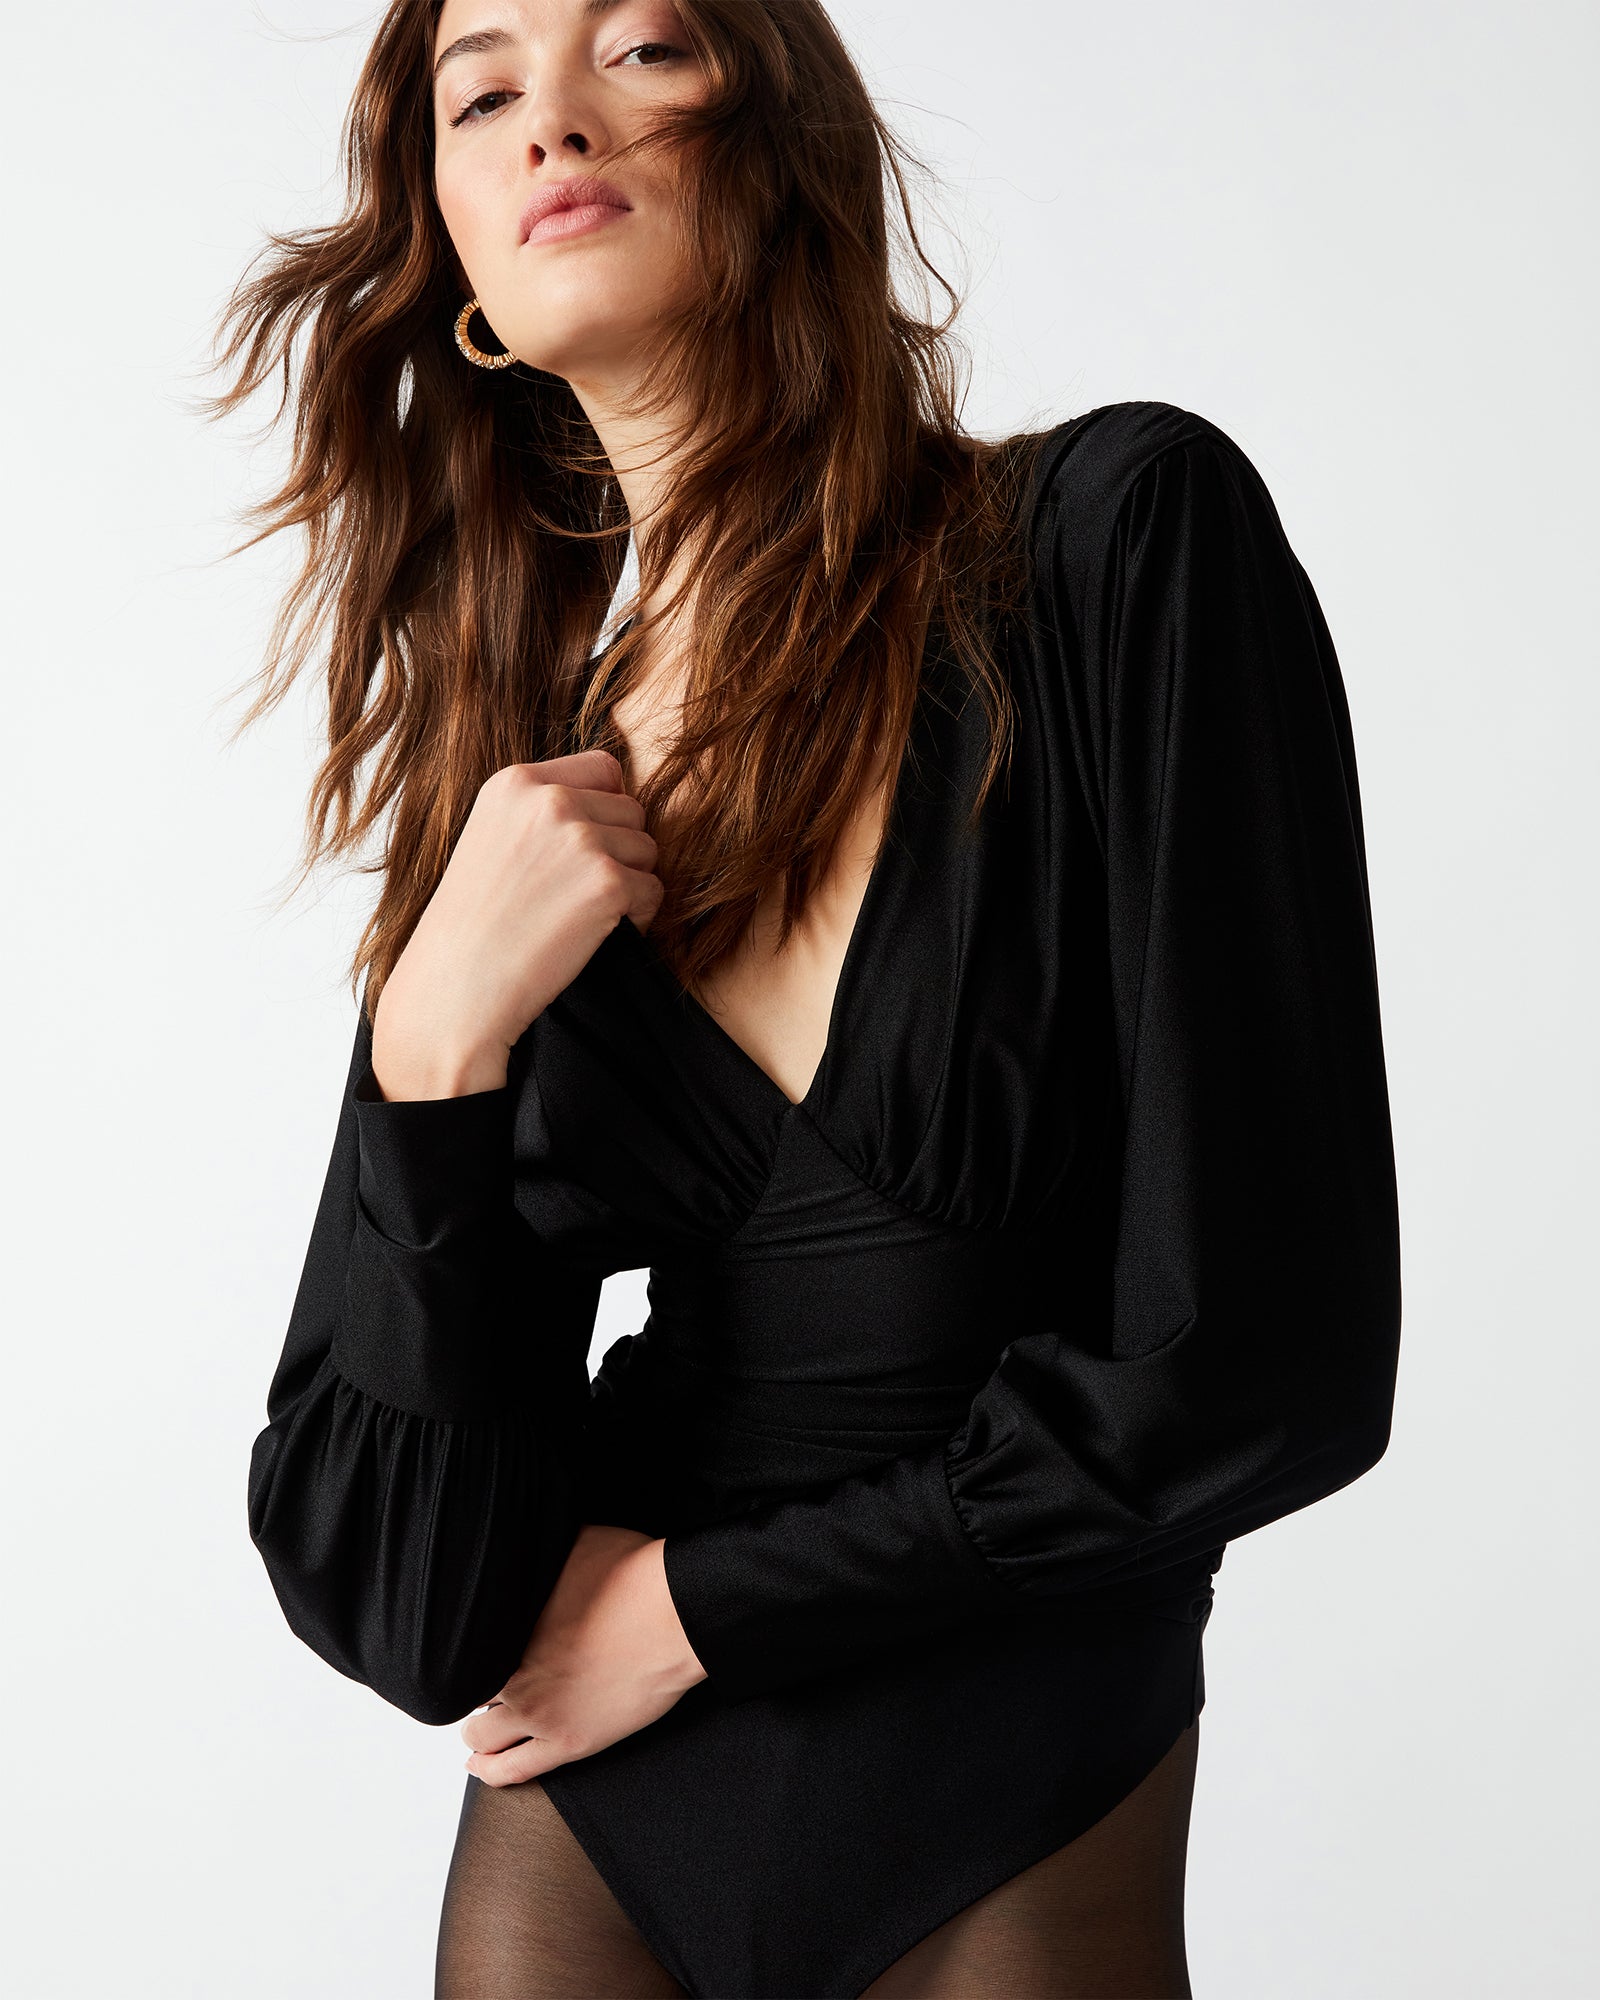 Cut The Check Ruched Bodysuit - Black